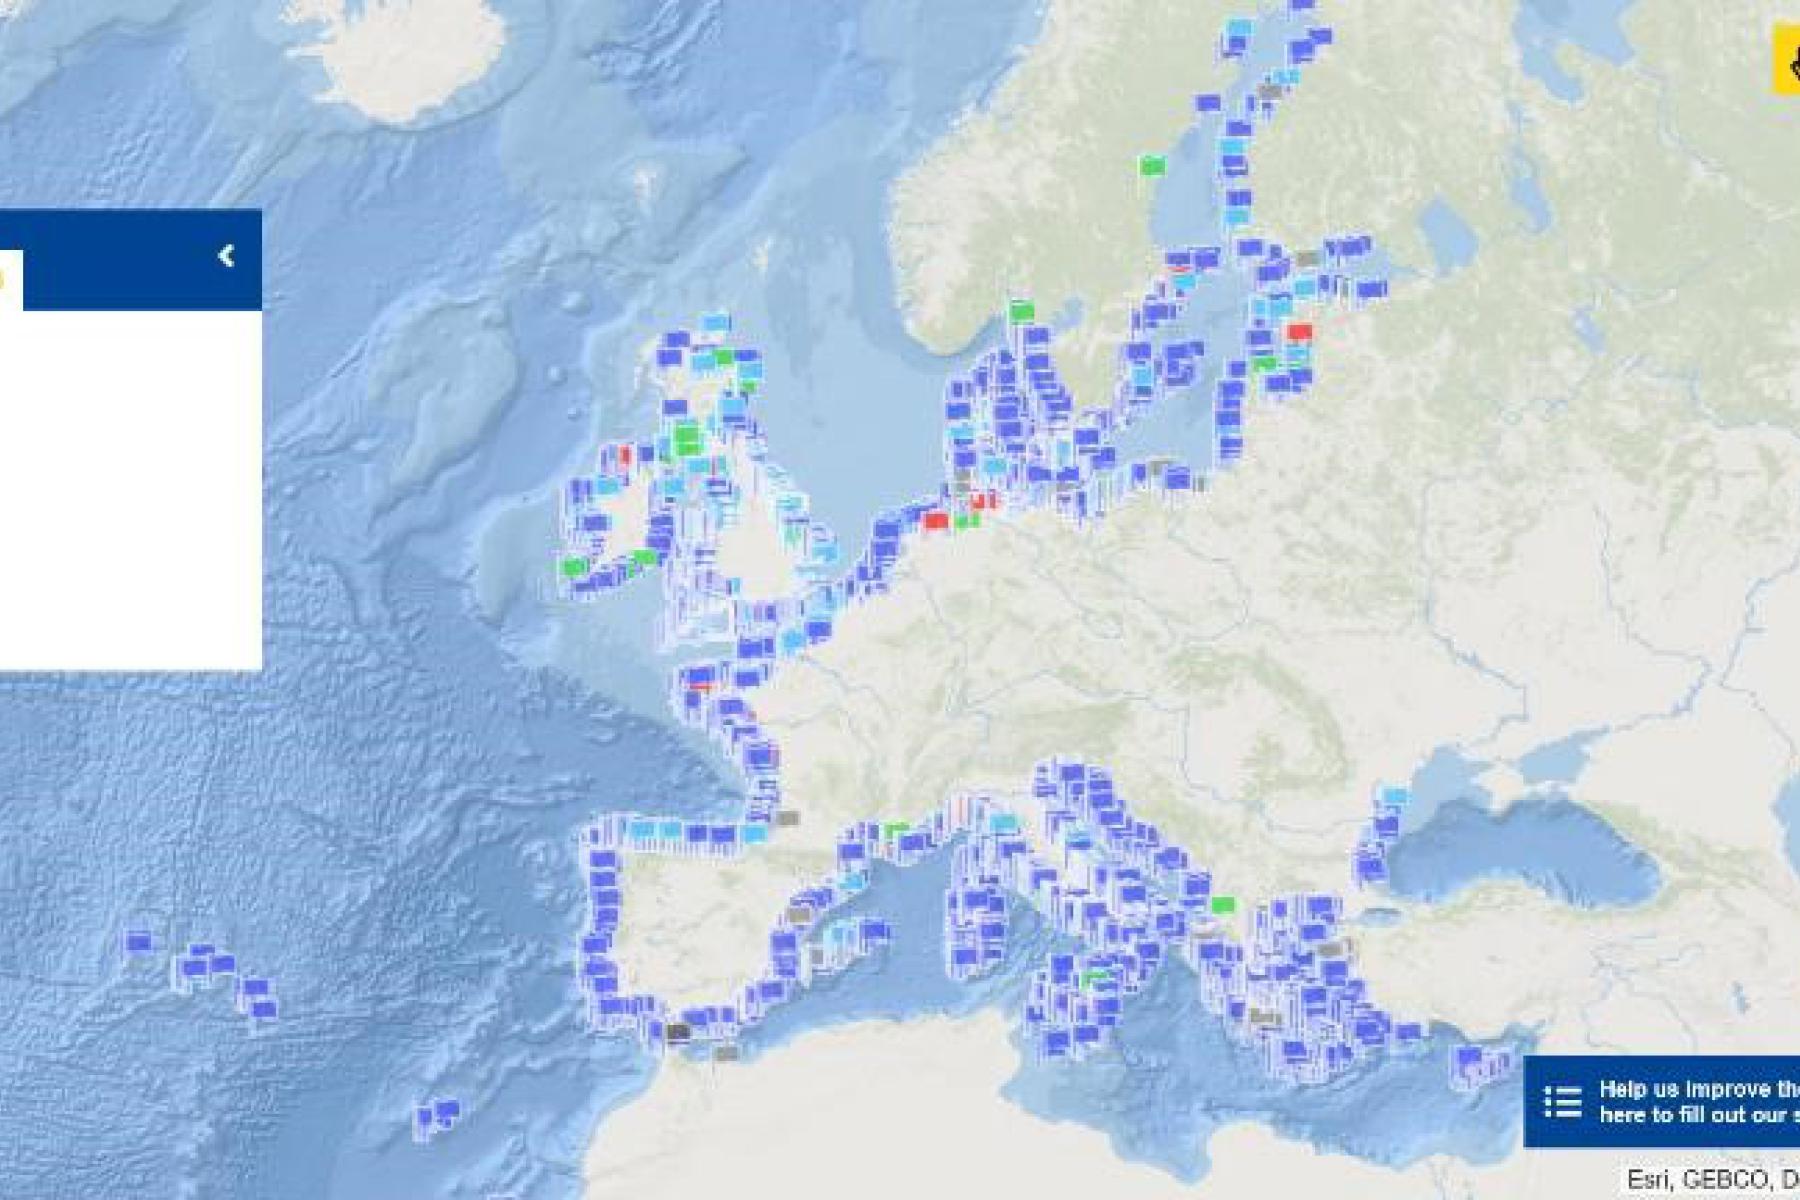 This map gives an overview of the bathing water quality along the European coasts.